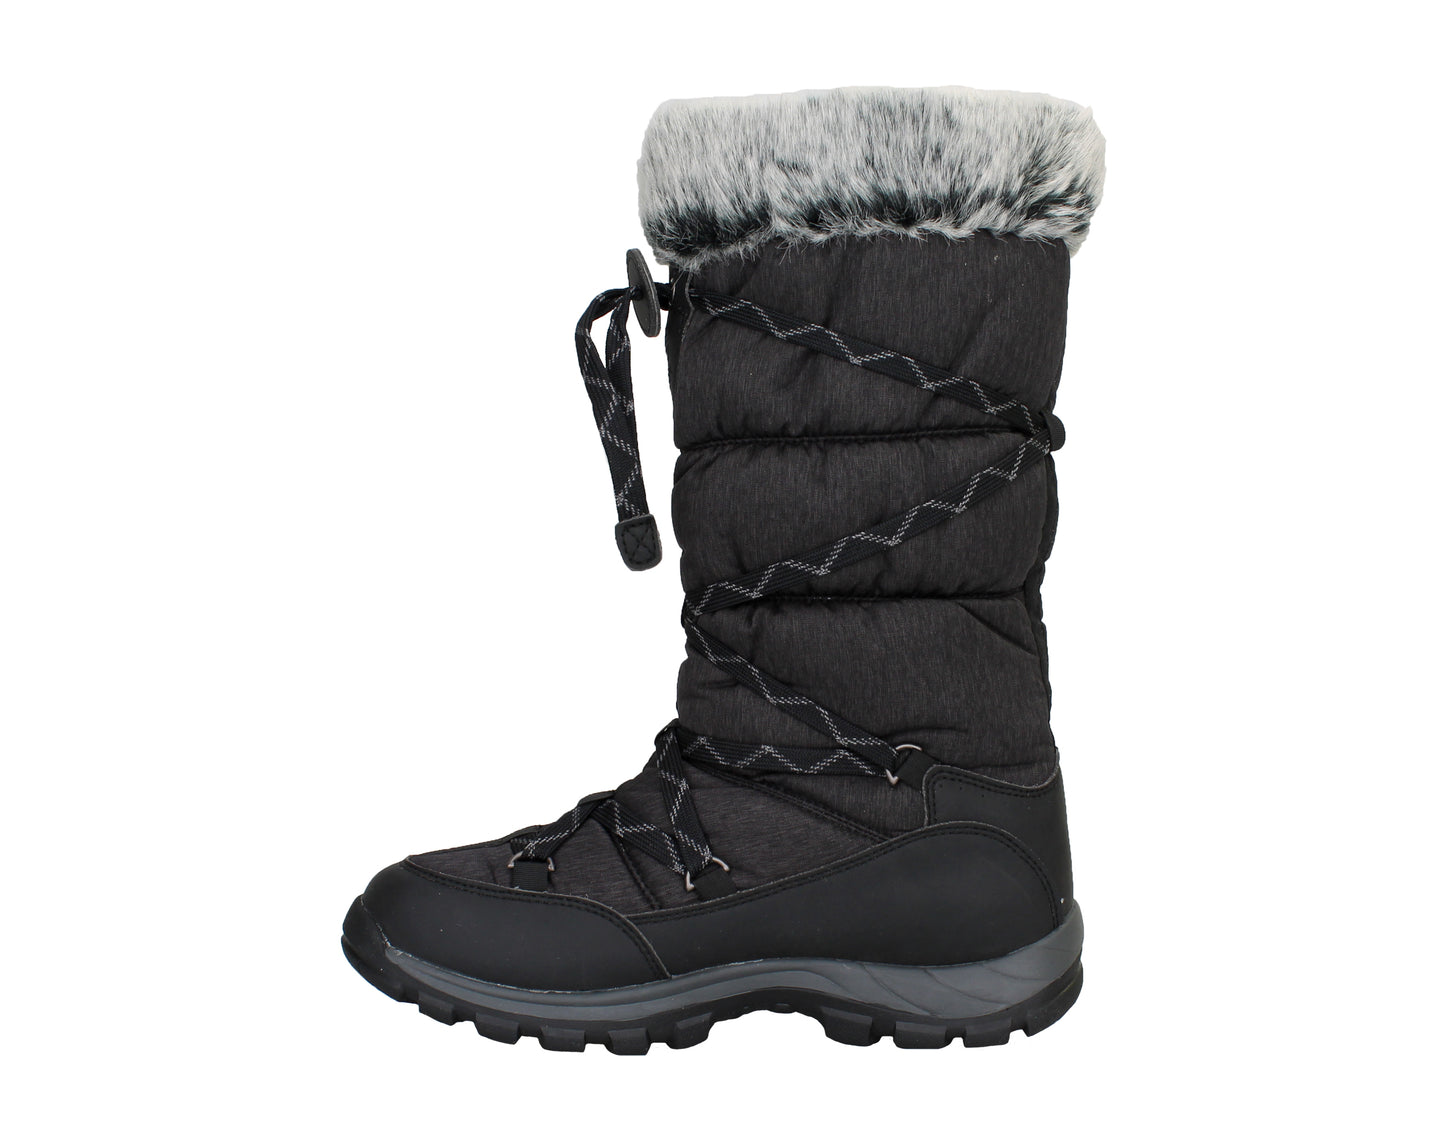 Timberland Chillberg Over the Chill Waterproof Women's Boots